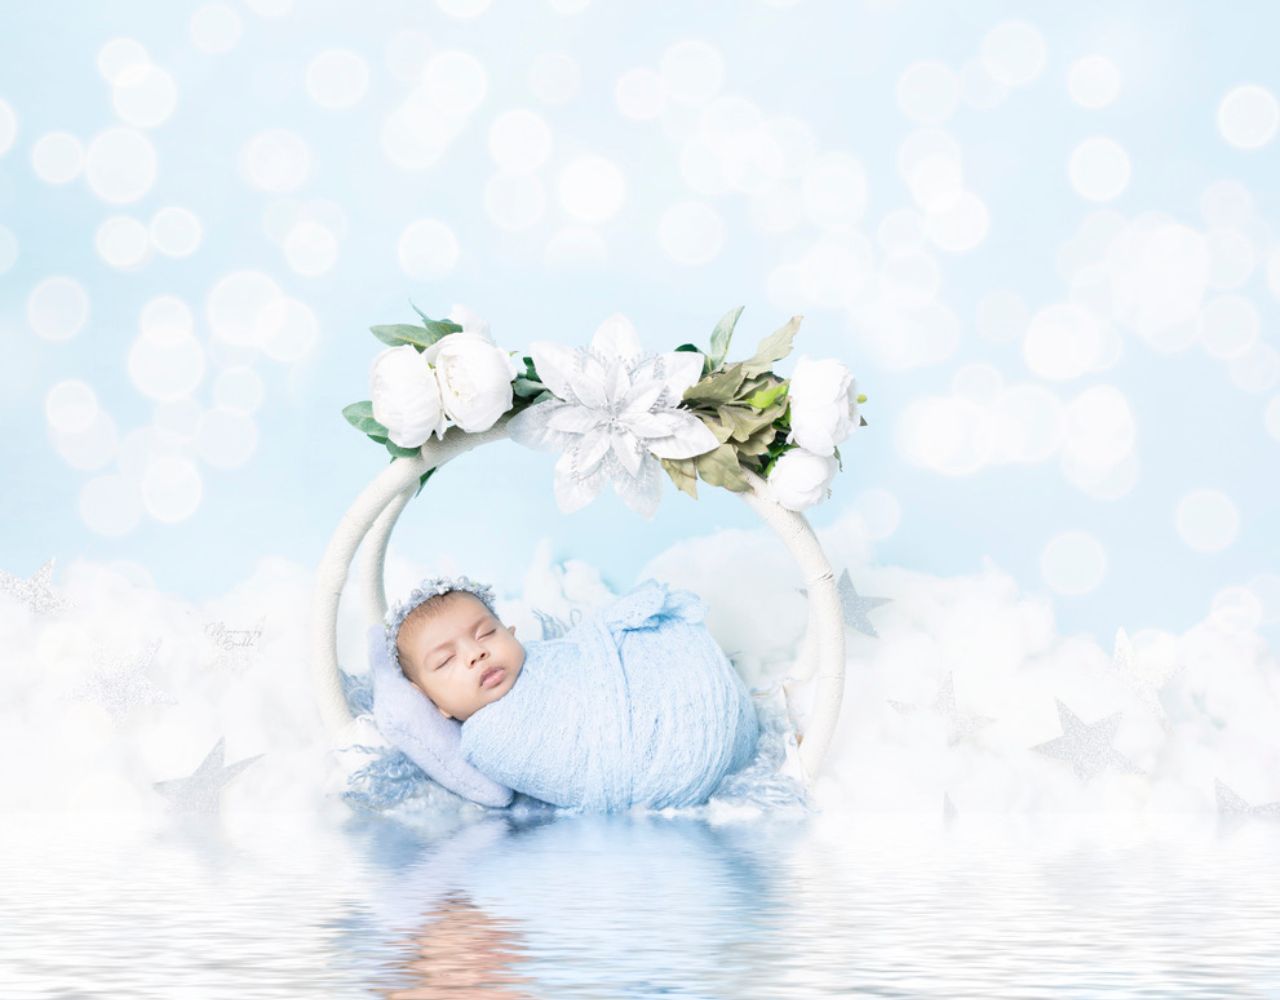 Whimsical Wonderland: Fantasy Themes for Magical Infant Photography